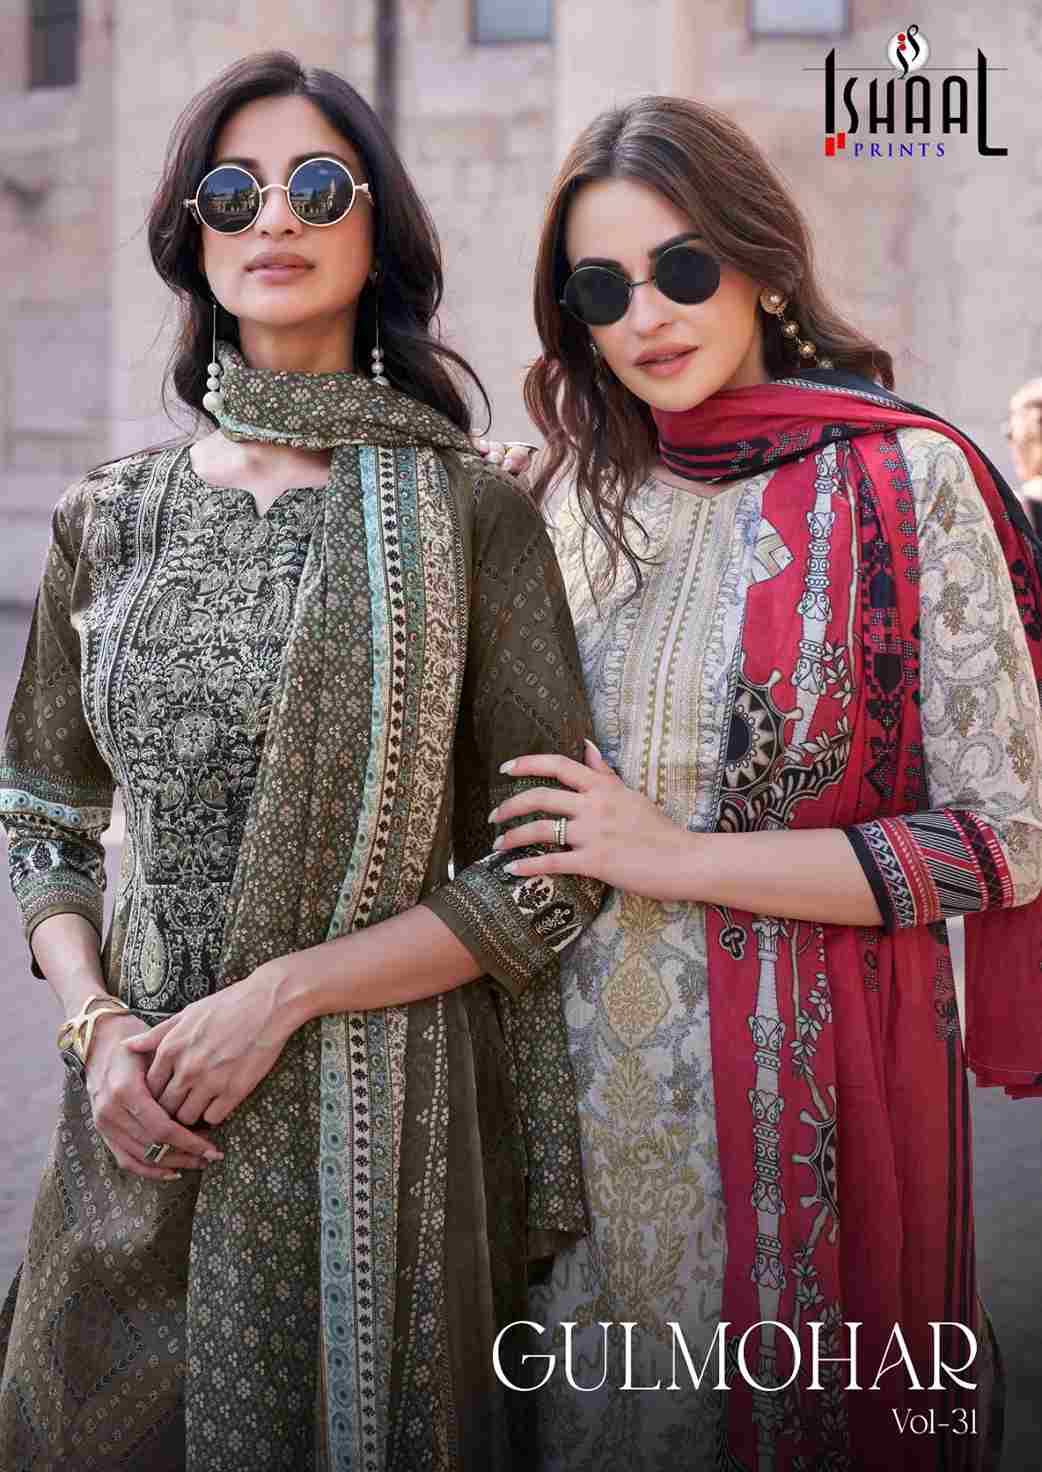 Gulmohar Vol-31 By Ishaal Prints 31001 To 31010 Series Beautiful Festive Suits Colorful Stylish Fancy Casual Wear & Ethnic Wear Pure Lawn Prints Dresses At Wholesale Price